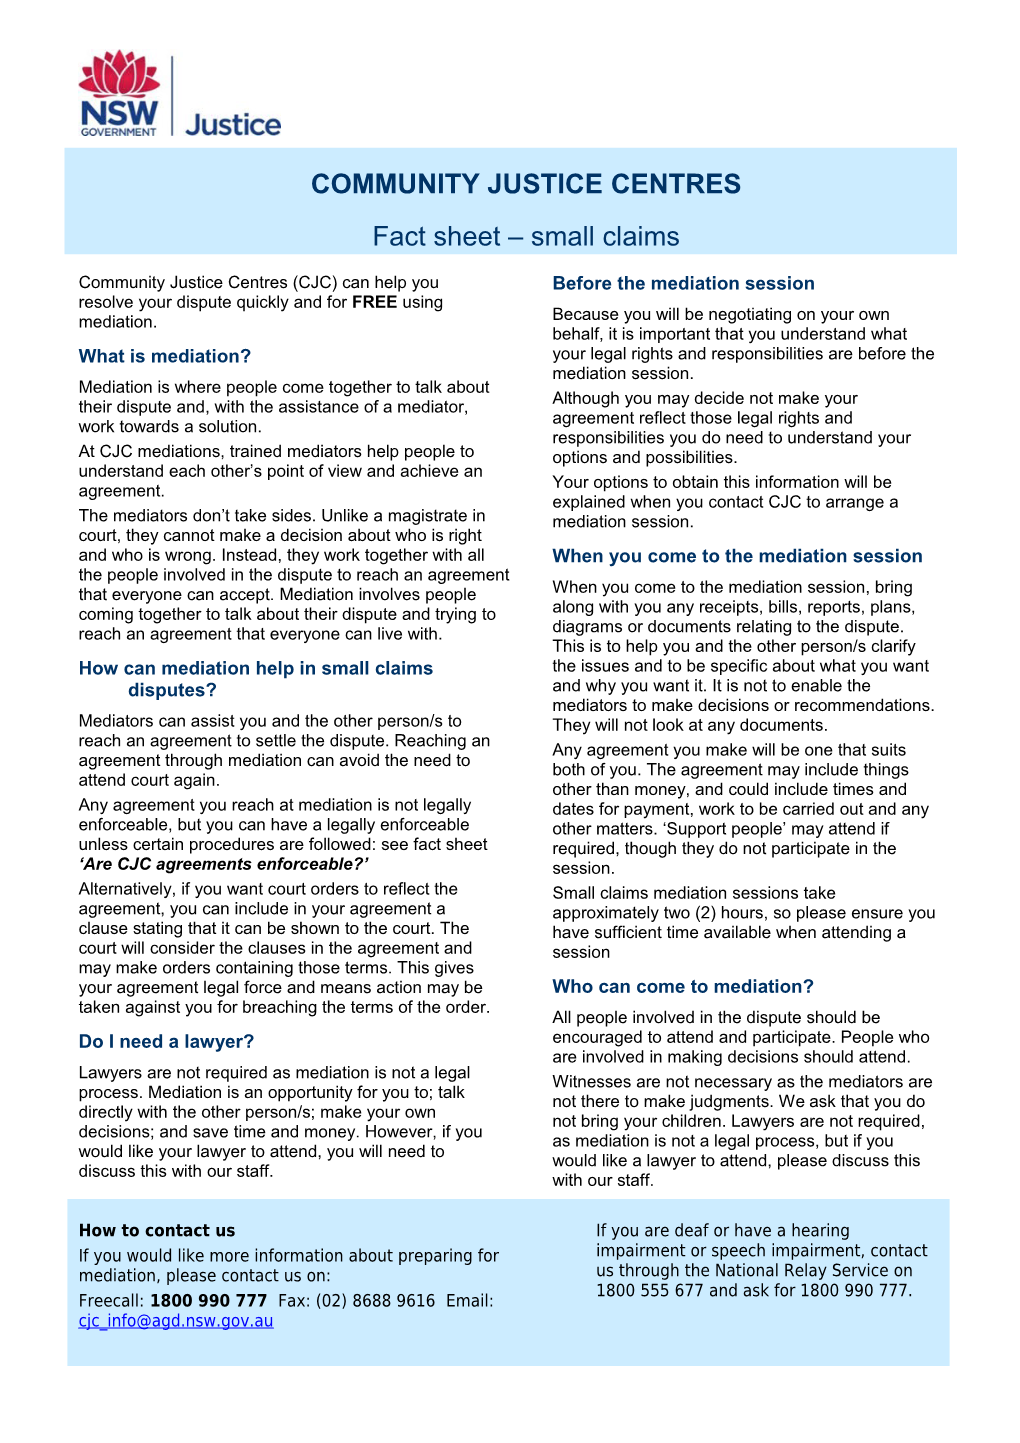 Small Claims Fact Sheet - CJC